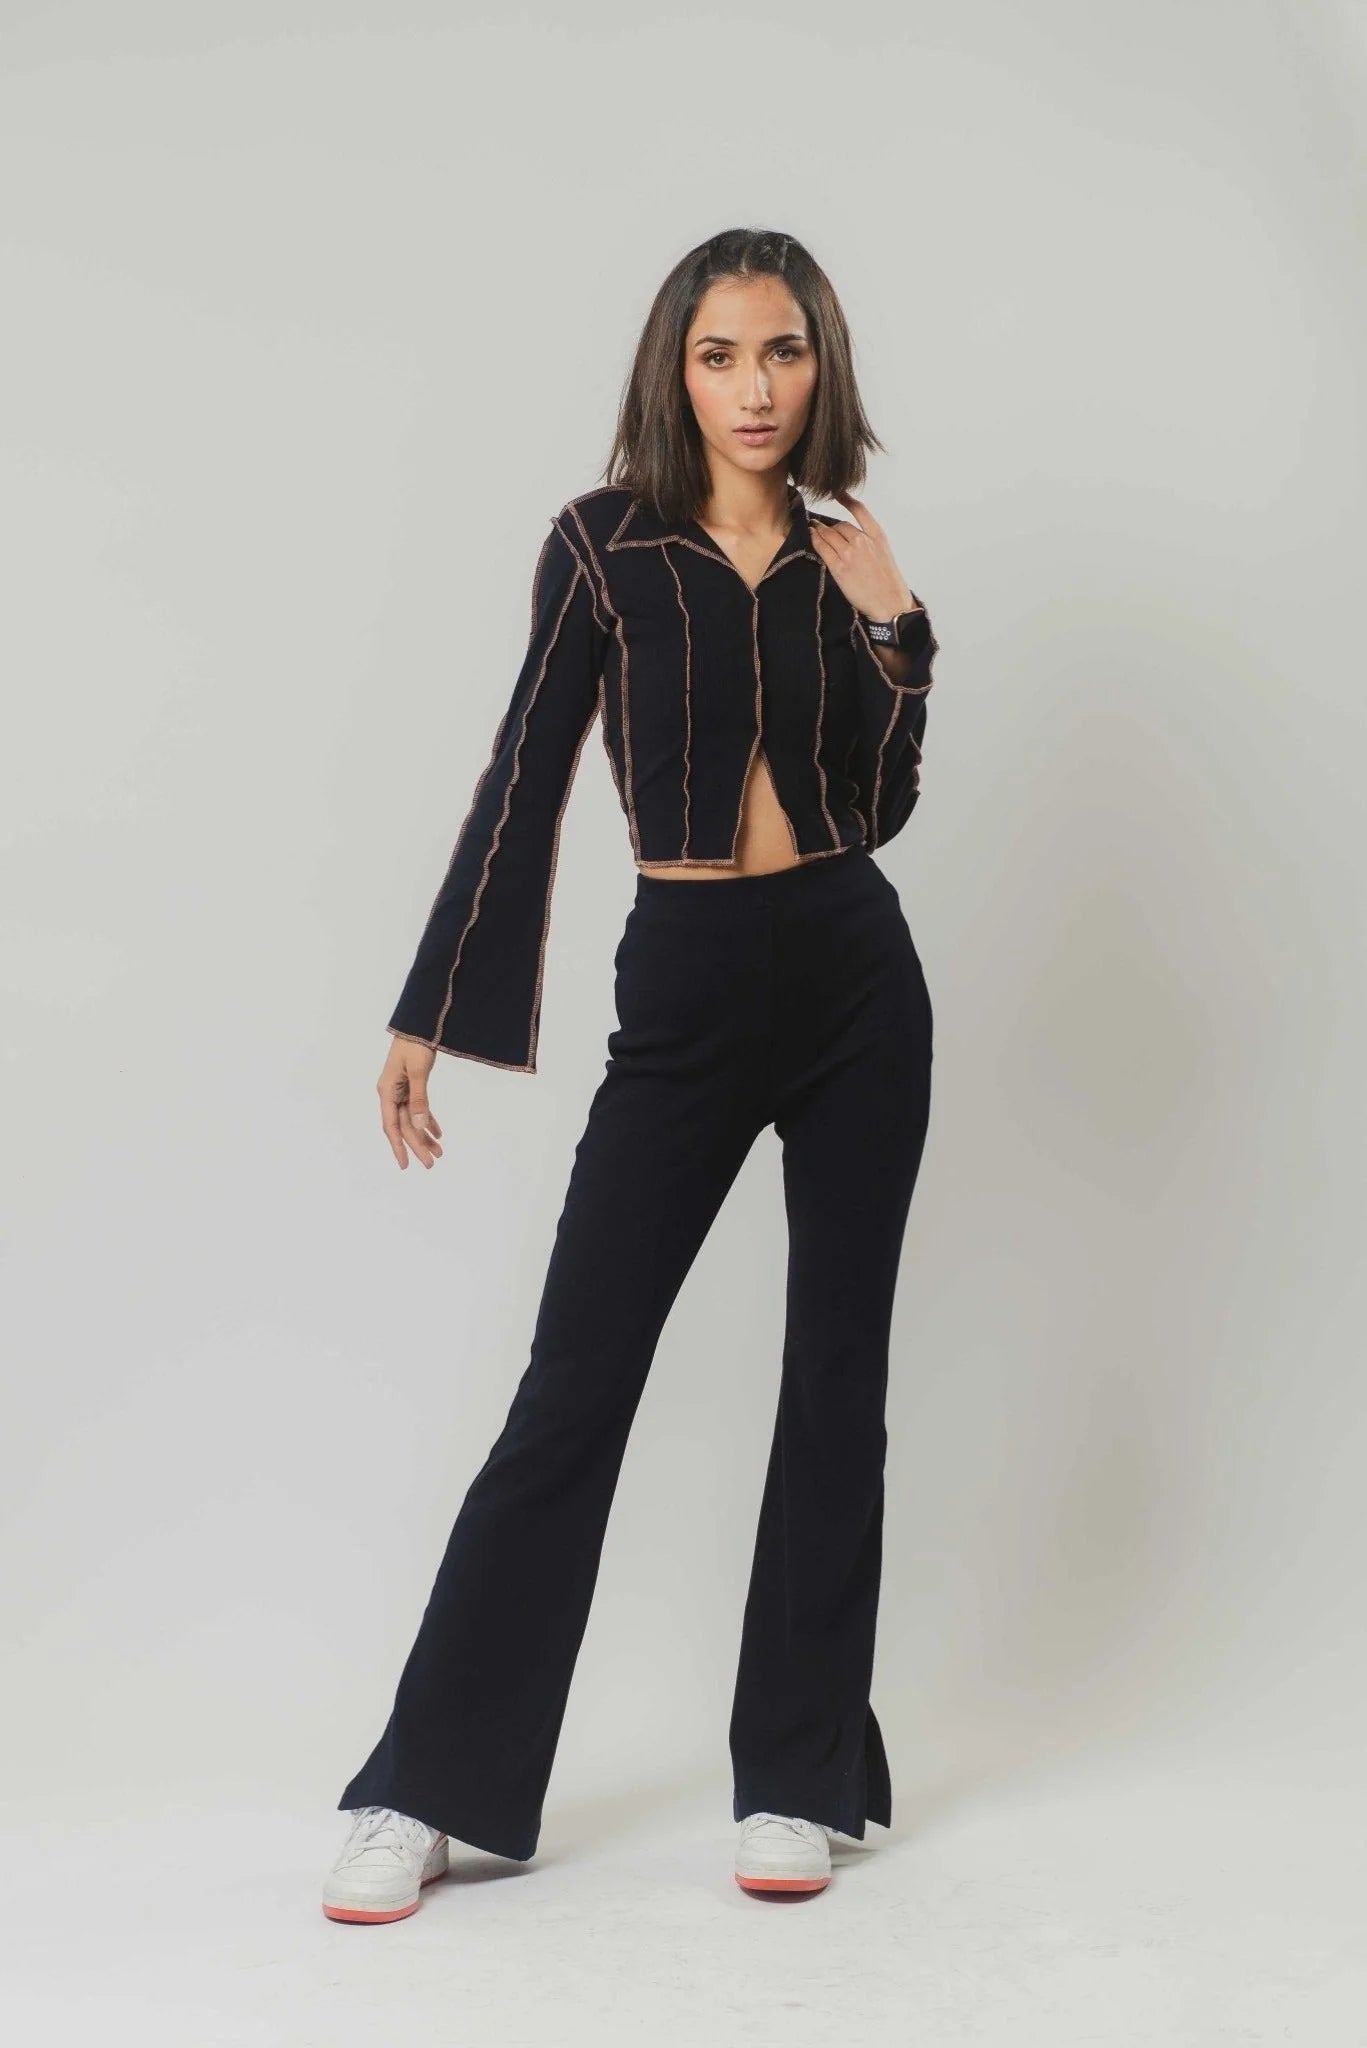 Stylish Ribbed Pants for Women  Shop high-waisted, boot-cut